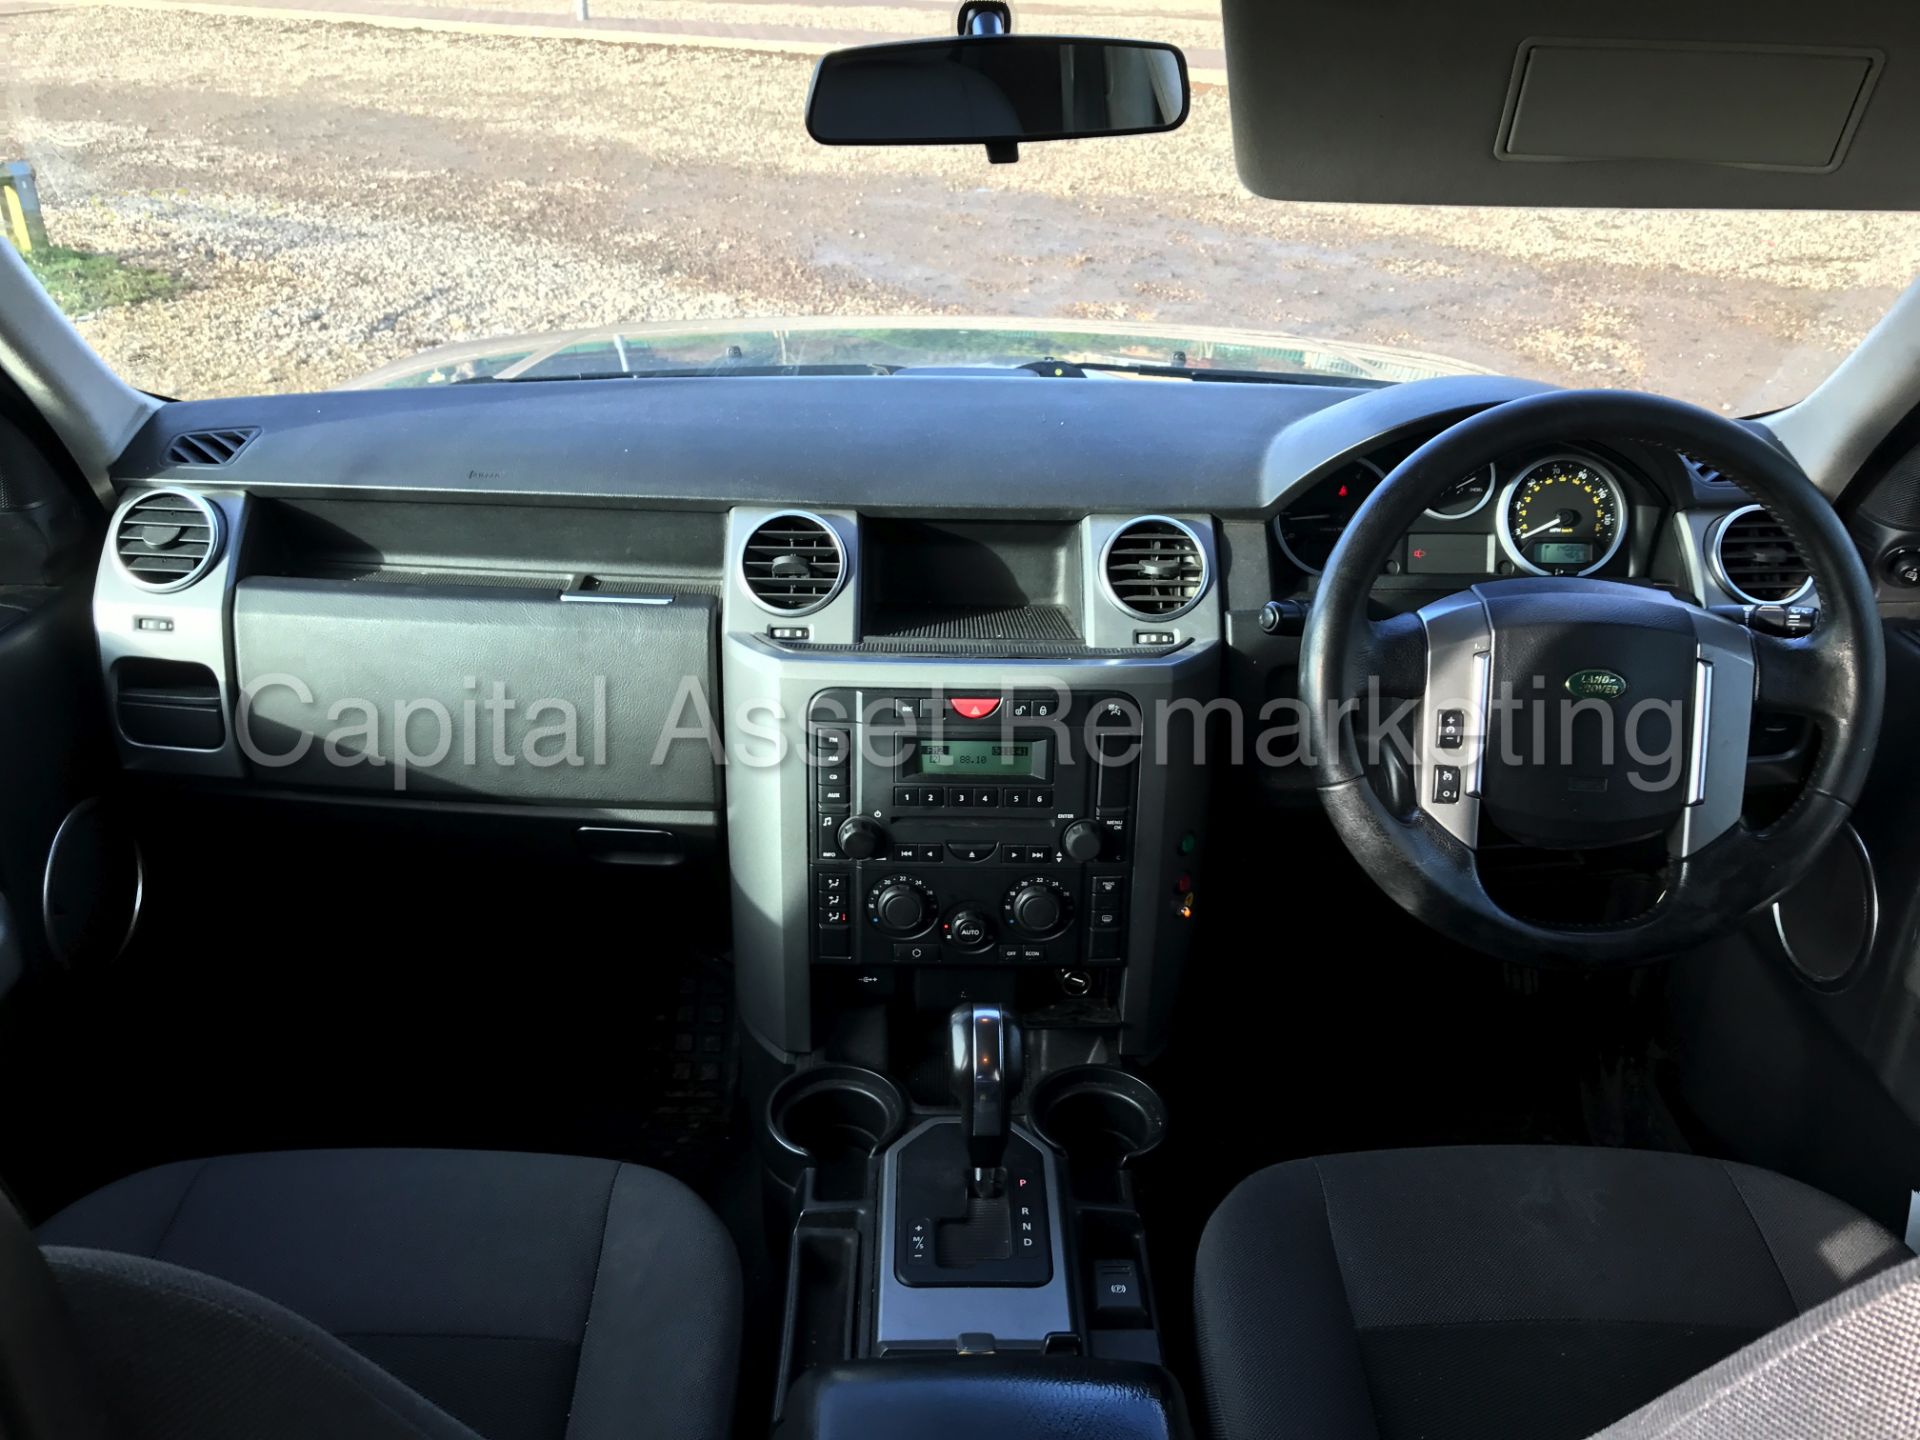 (On Sale) LAND ROVER DISCOVERY 3 'COMMERCIAL' (2009 - 09 REG) '2.7 TDV6 - AUTO TIP TRONIC' *RARE* - Image 19 of 26